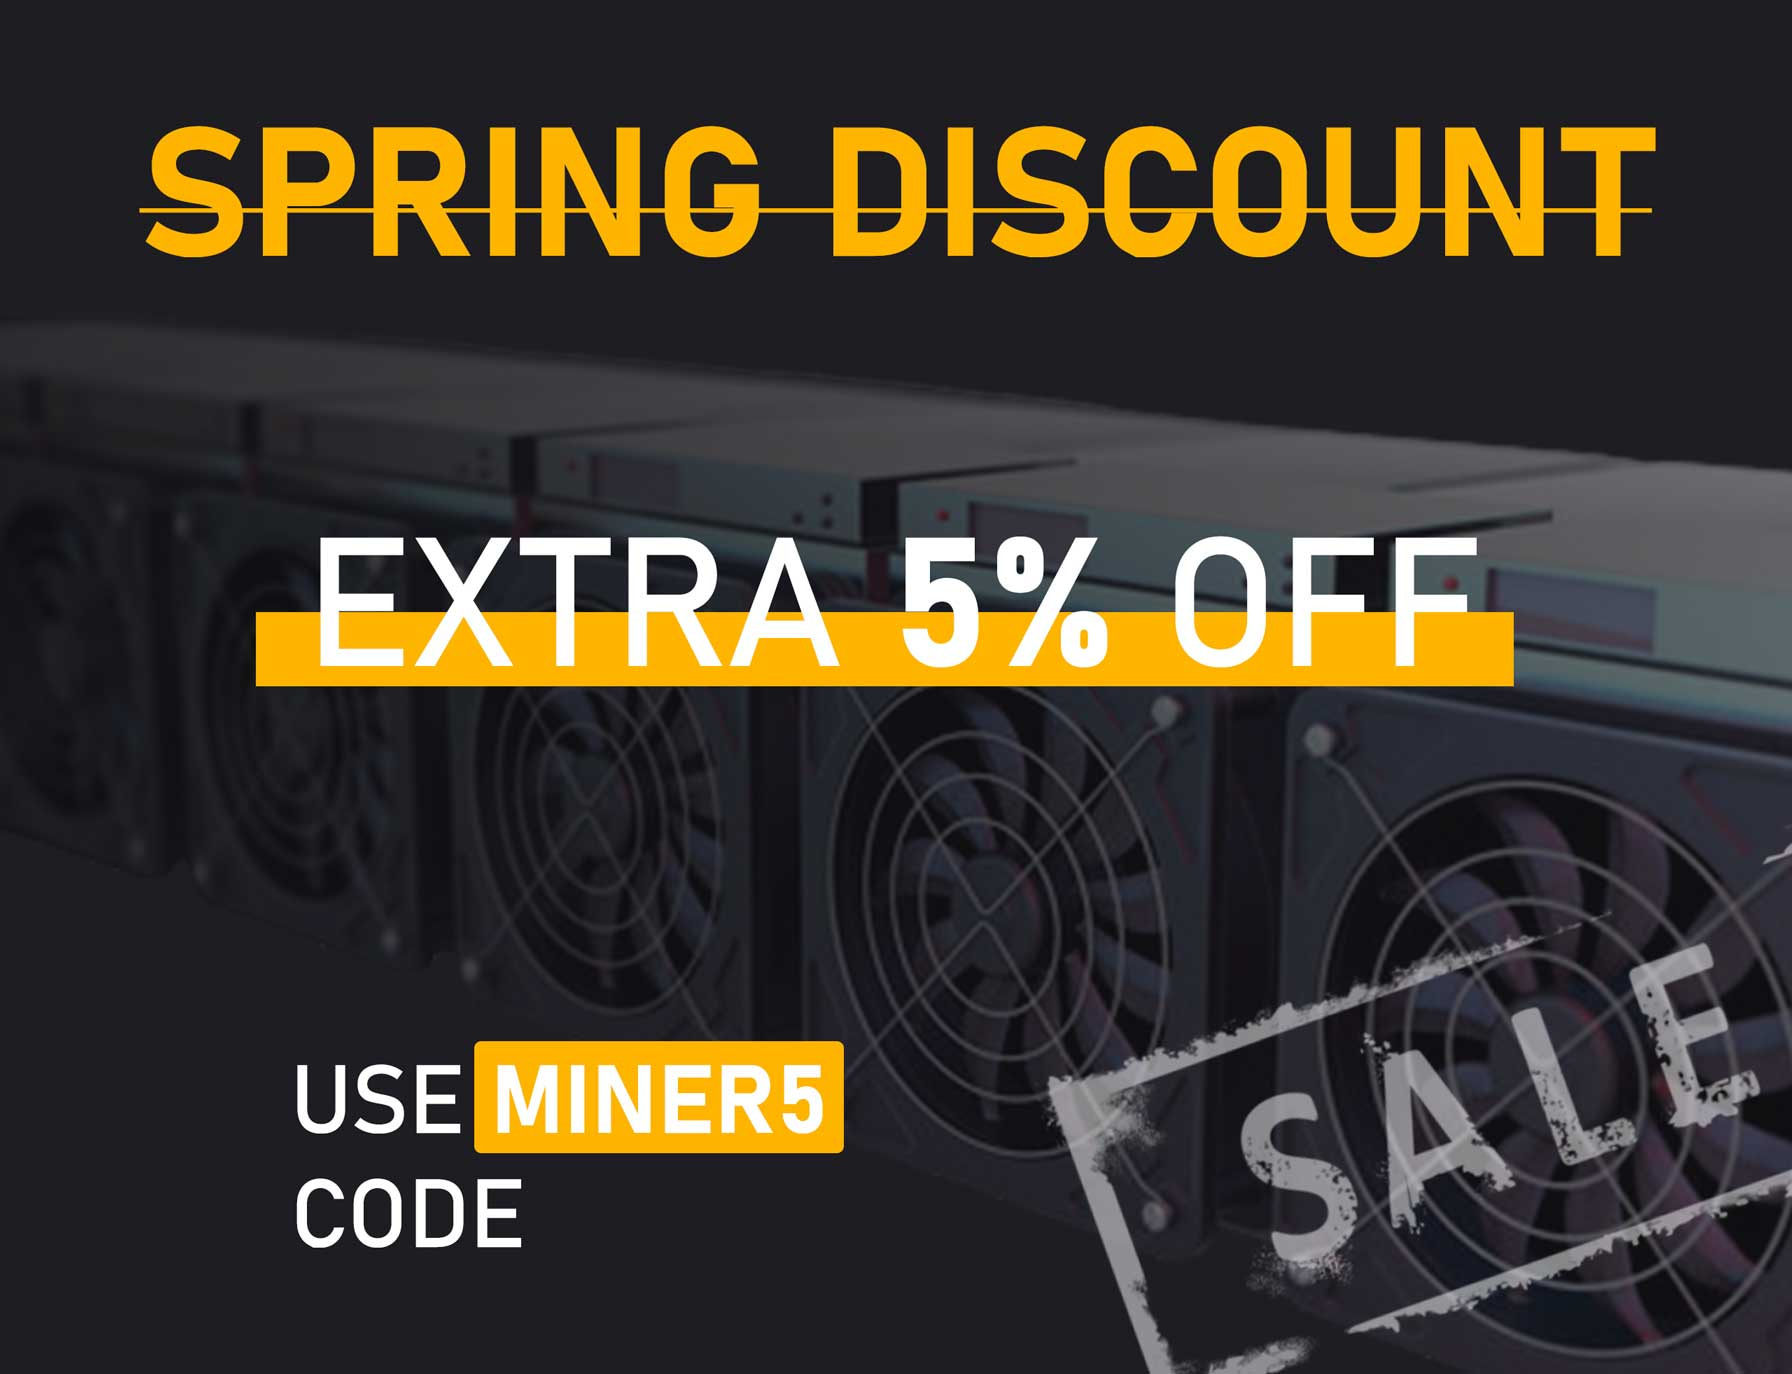 SPRING DISCOUNT